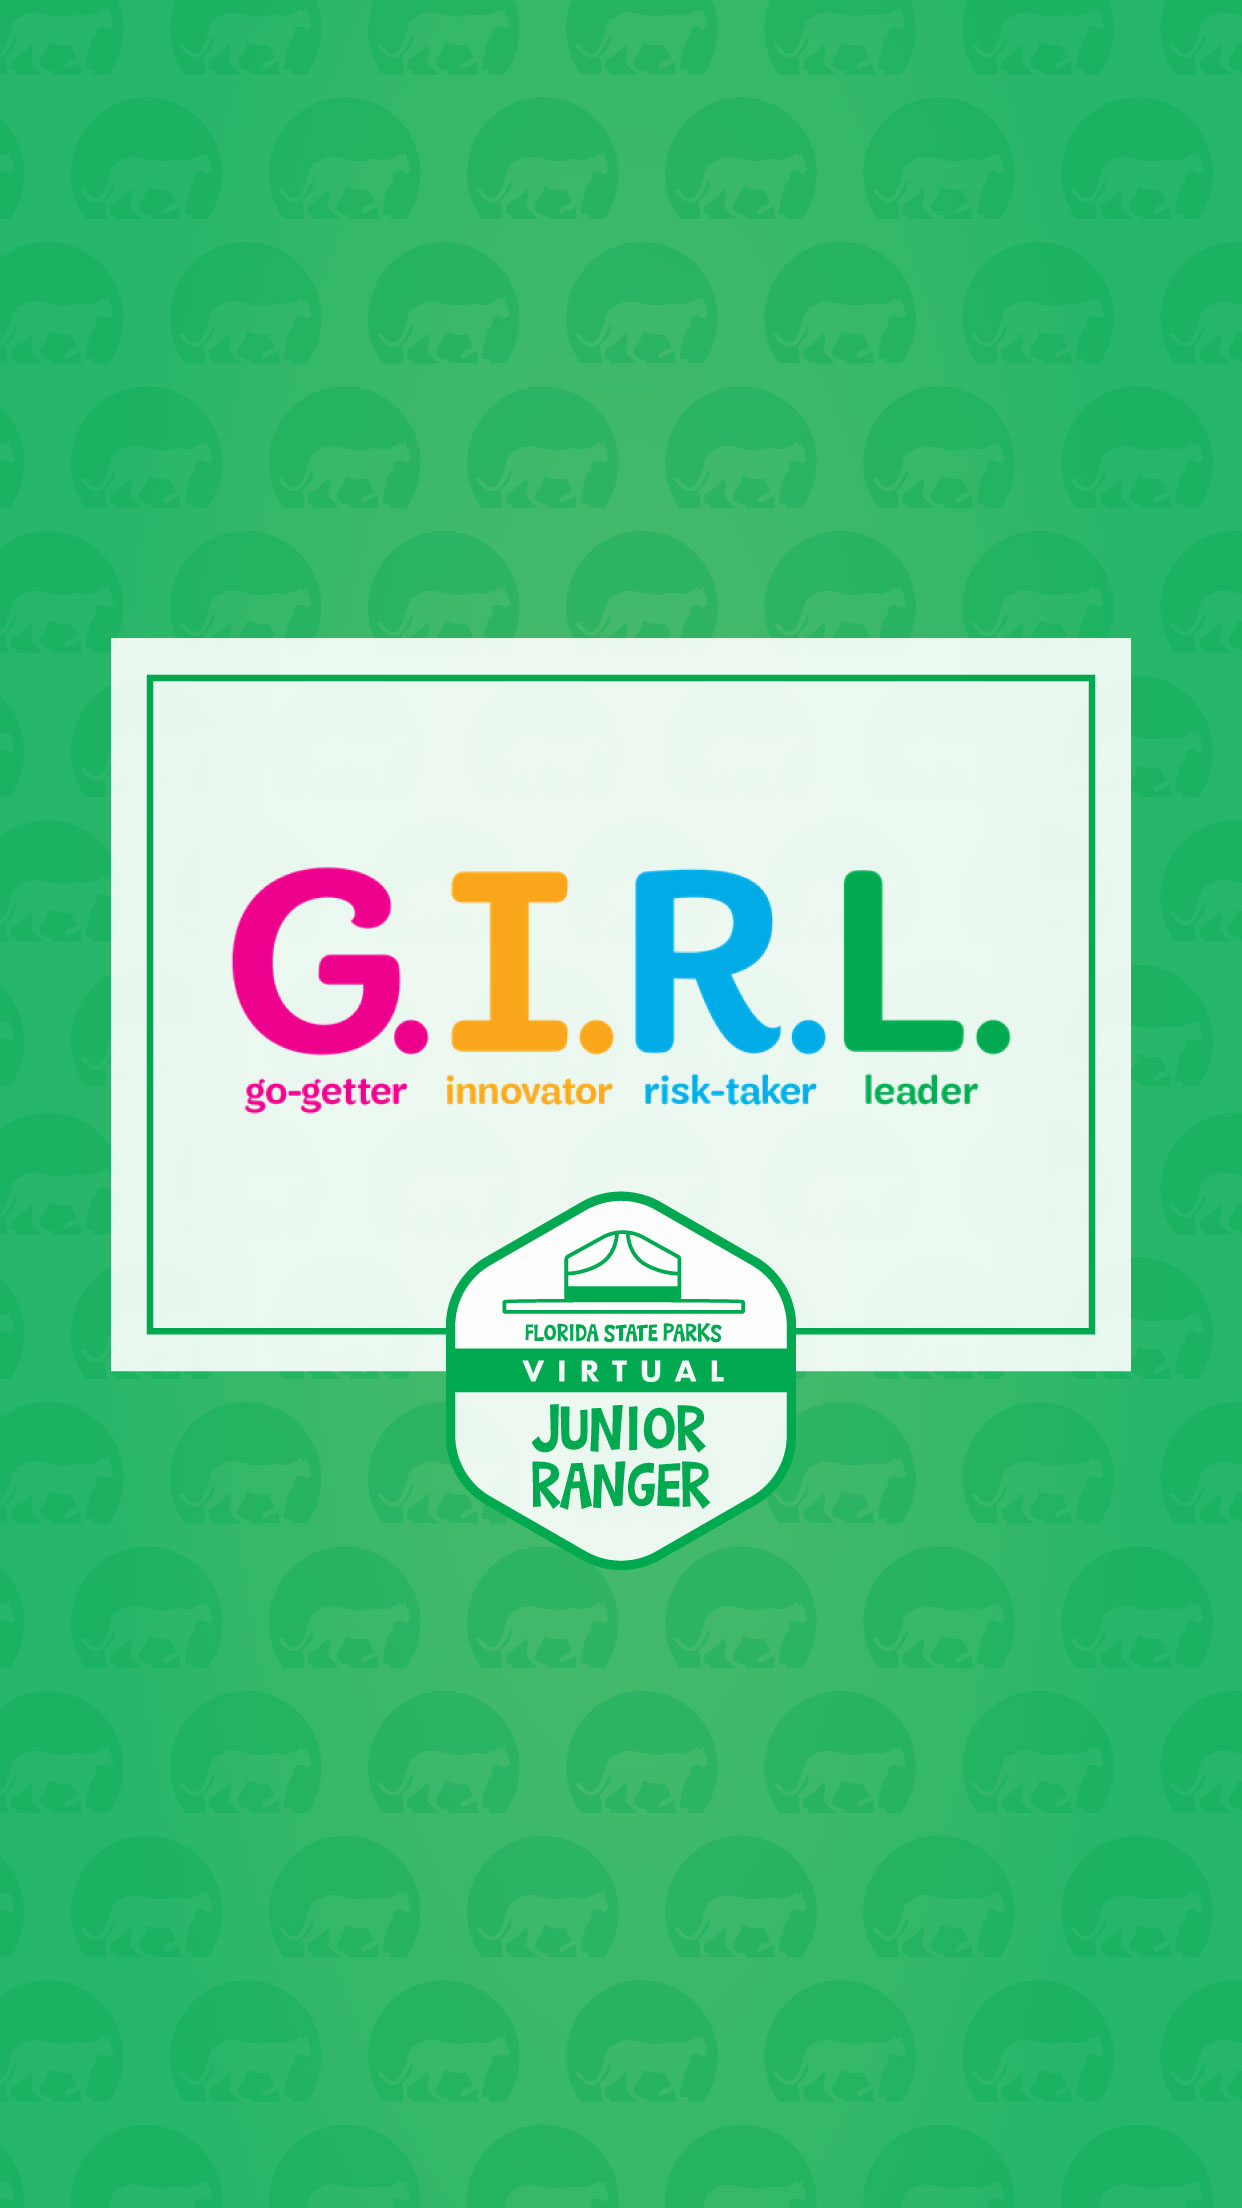 Virtual Junior Ranger Badge and GIRL on Green Background formatted for Mobile